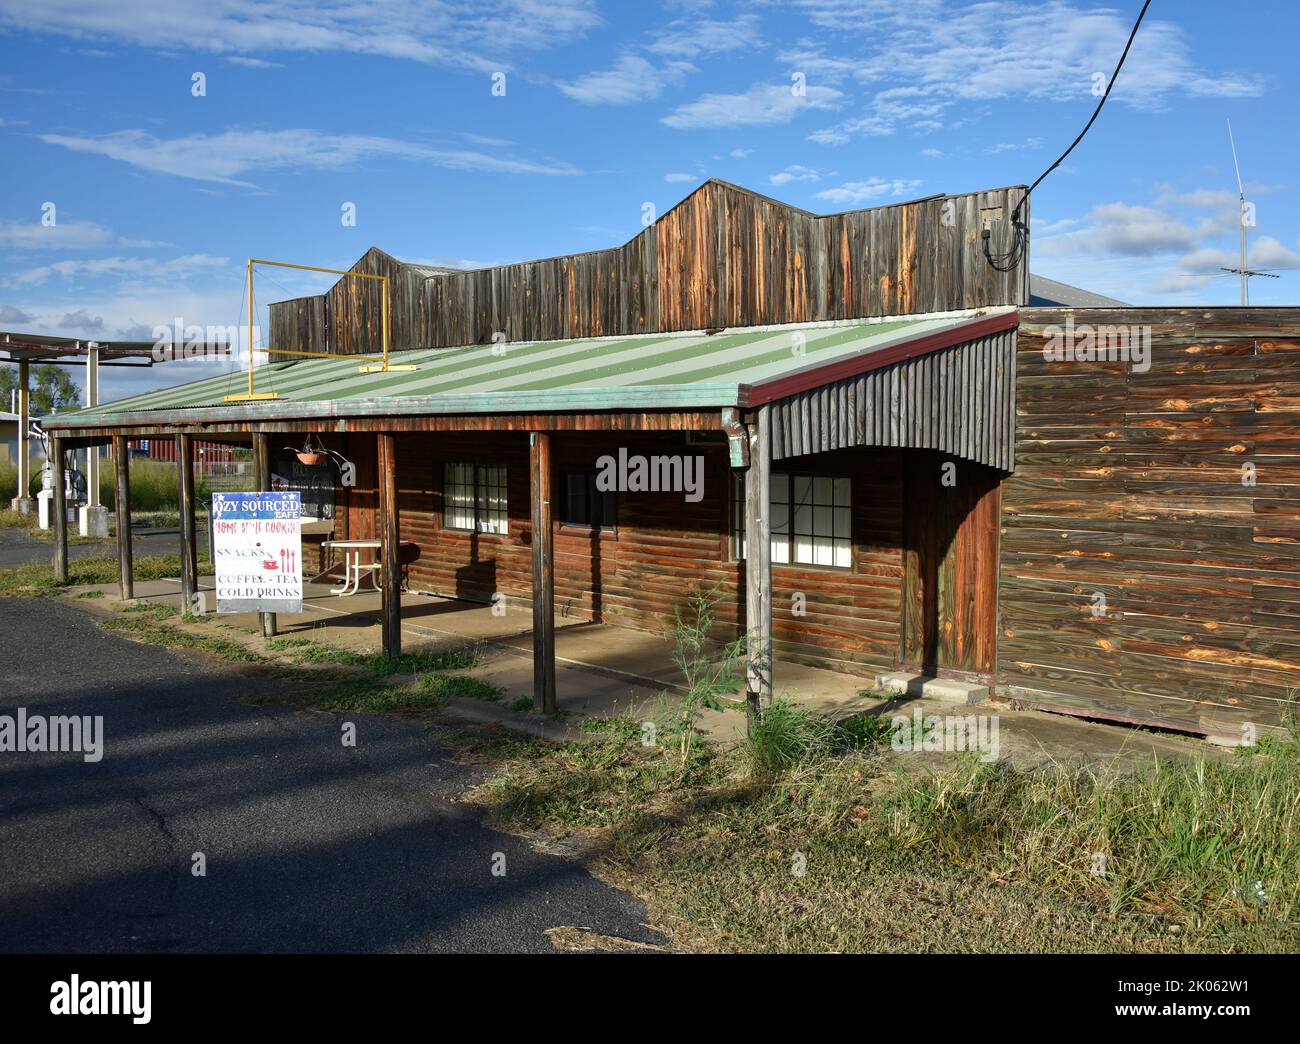 old abandoned fuel station and fruie and vegetable stall/shop outside Rockhampton in queensland, australia Stock Photo